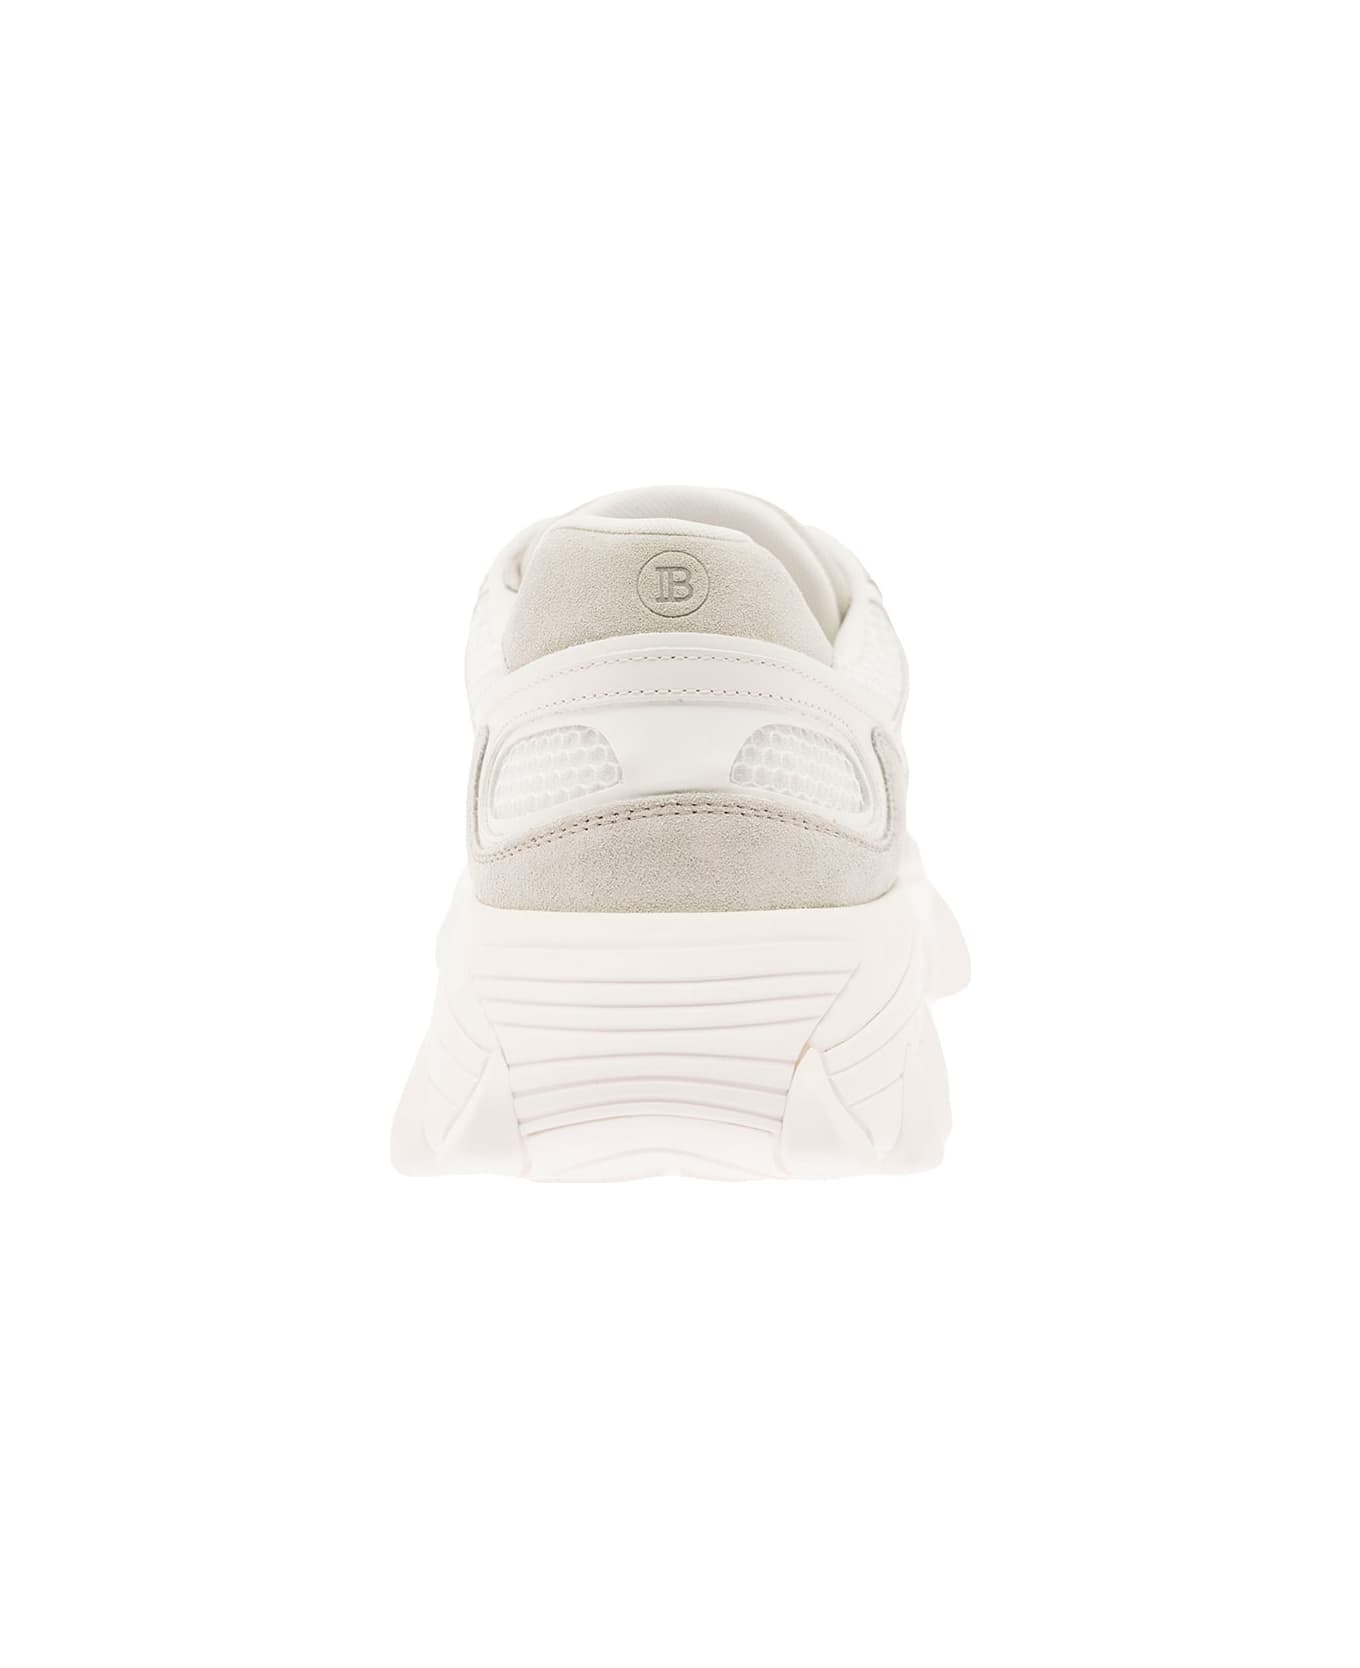 Balmain 'b-east' White Trainers With Mesh And Suede Inserts In Leather Man - White